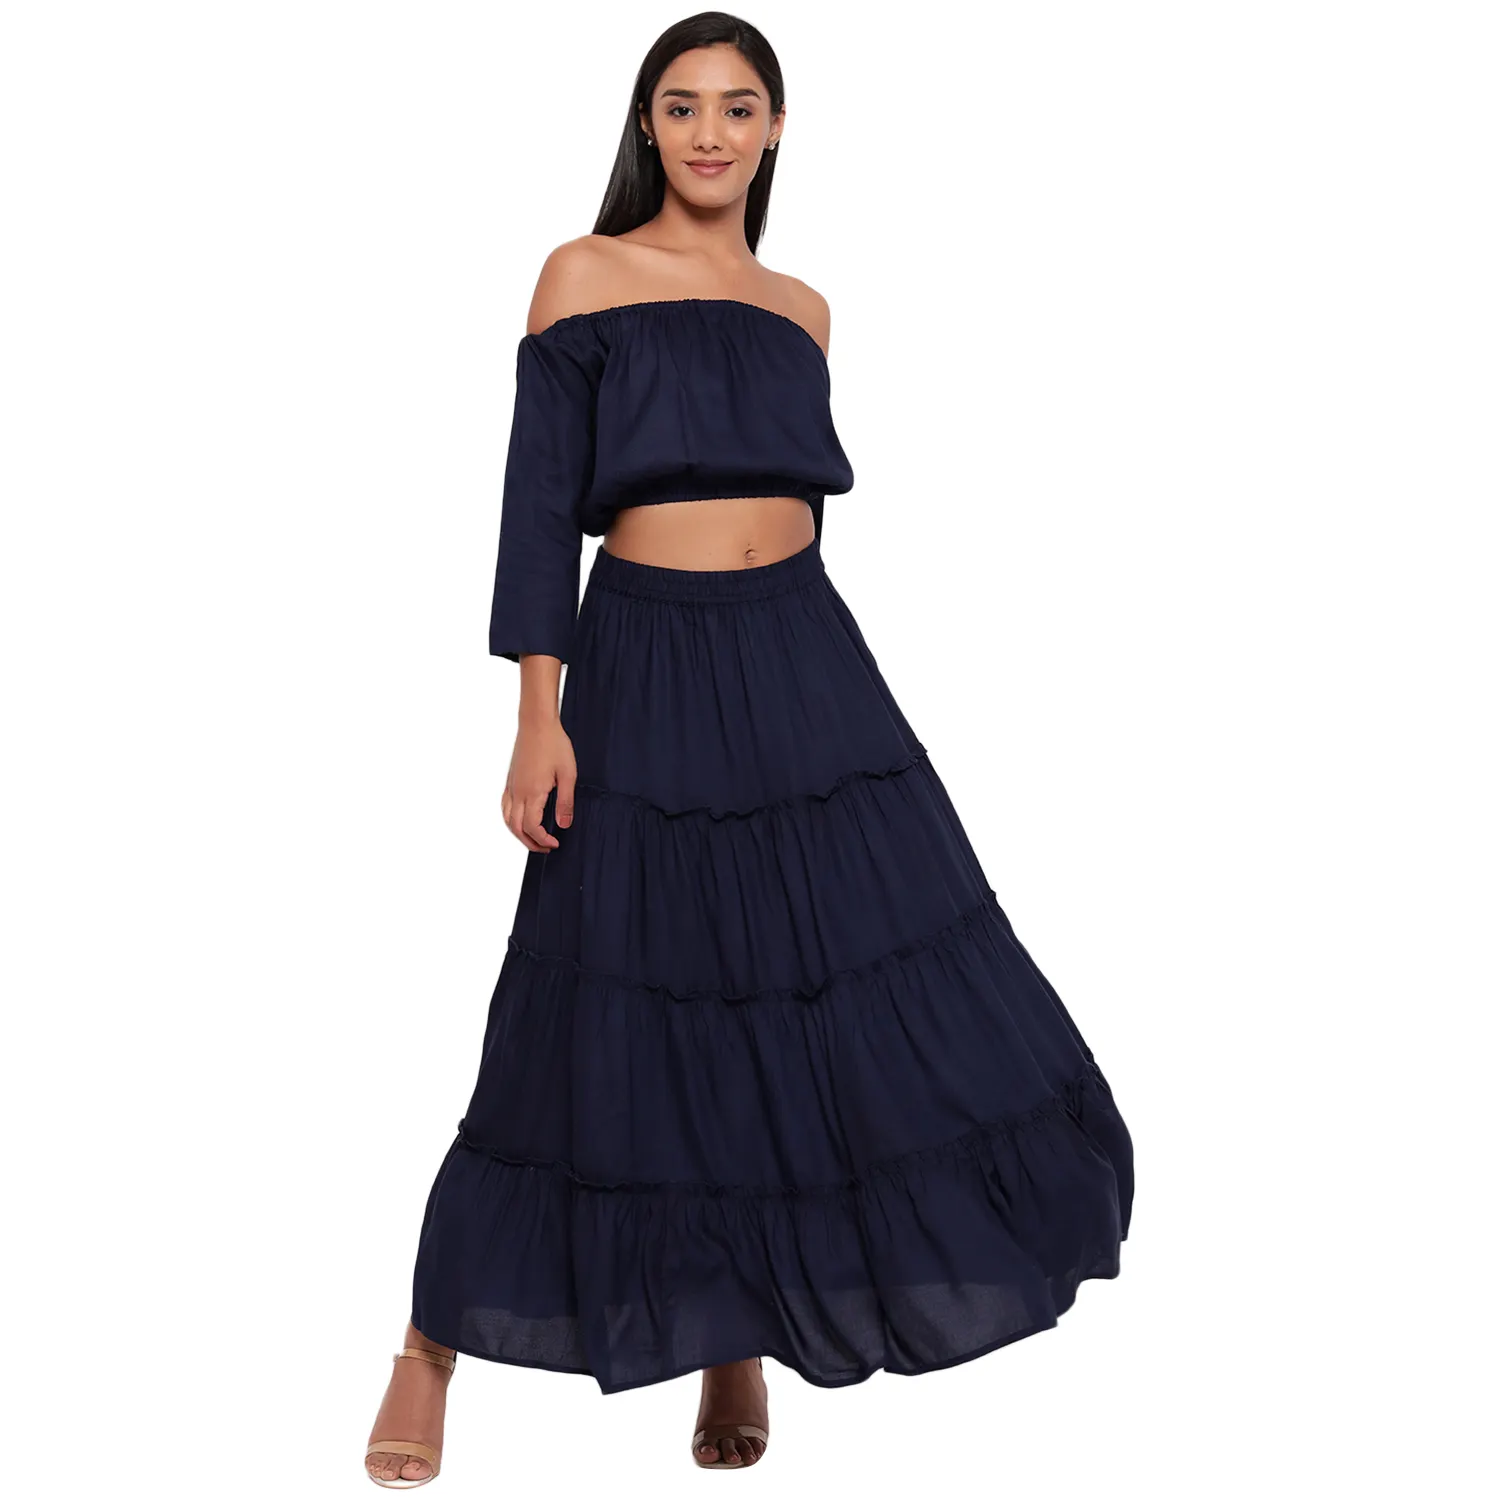 Women's Rayon Solid Navy Blue Skirt Top Set Two Piece Prom Smoked Dress with Long Sleeves (AM083)